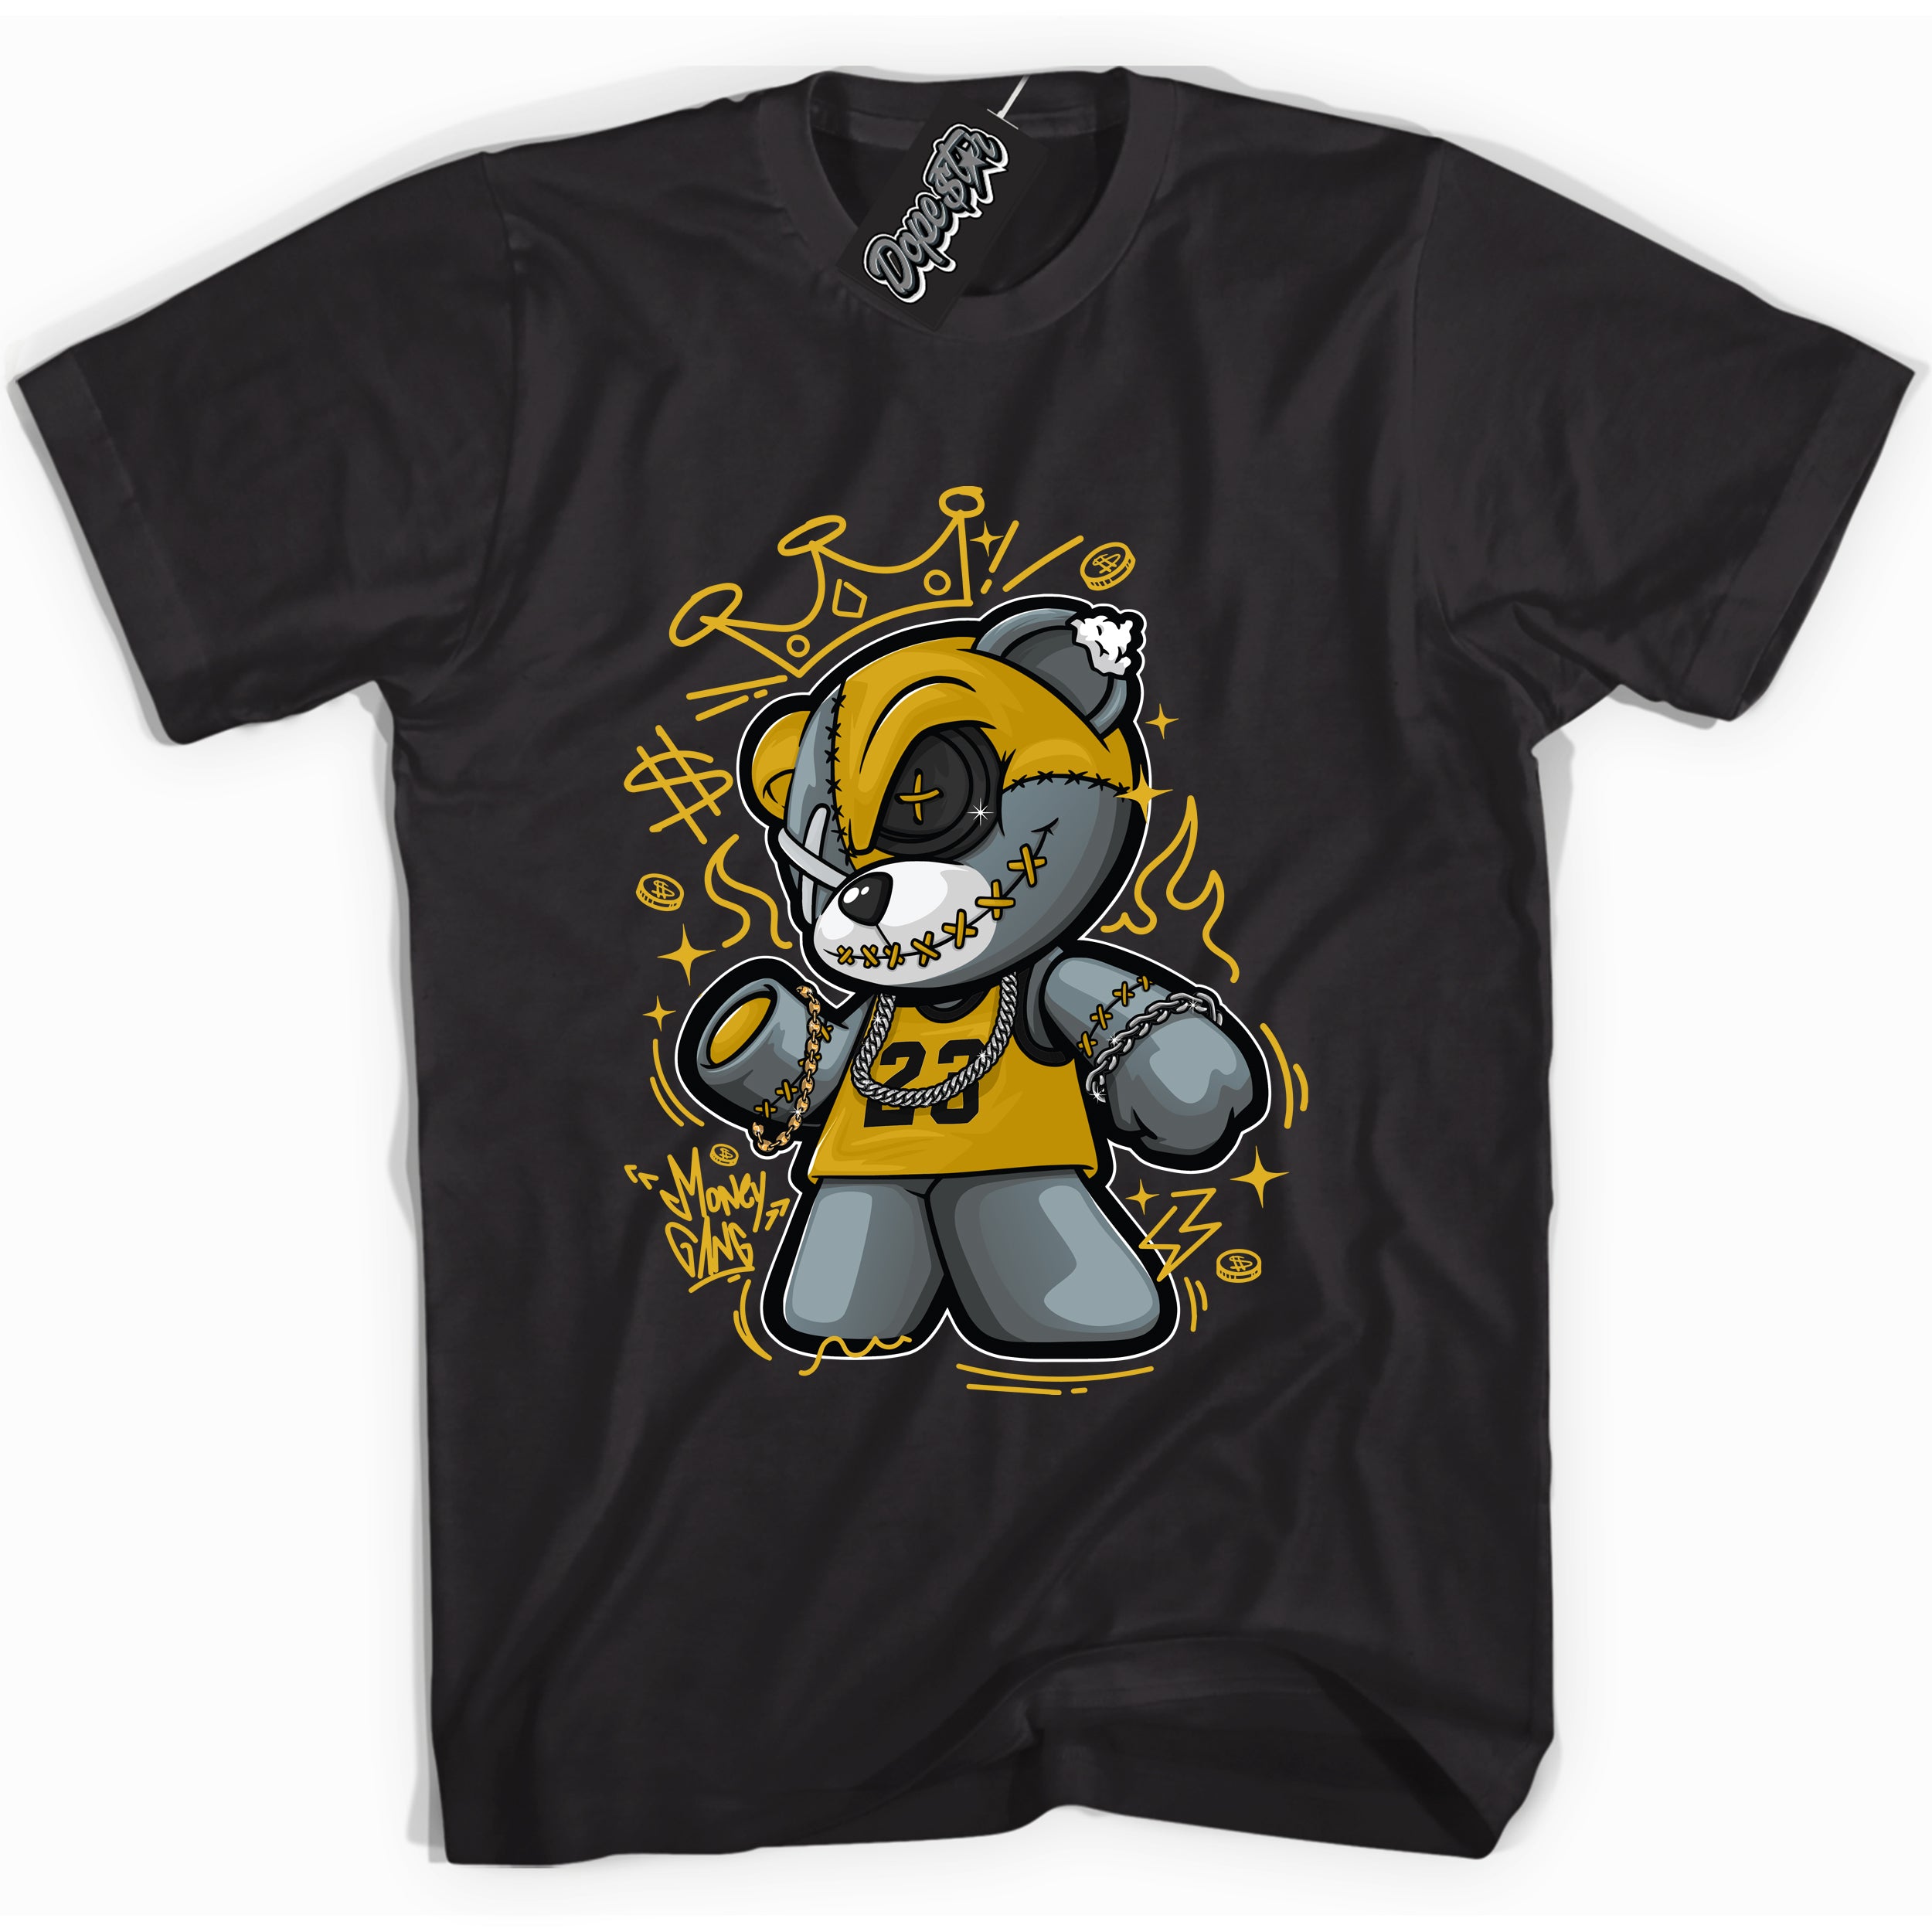 Cool Black Shirt with “ Money Gang Bear ” design that perfectly matches Yellow Ochre 6s Sneakers.